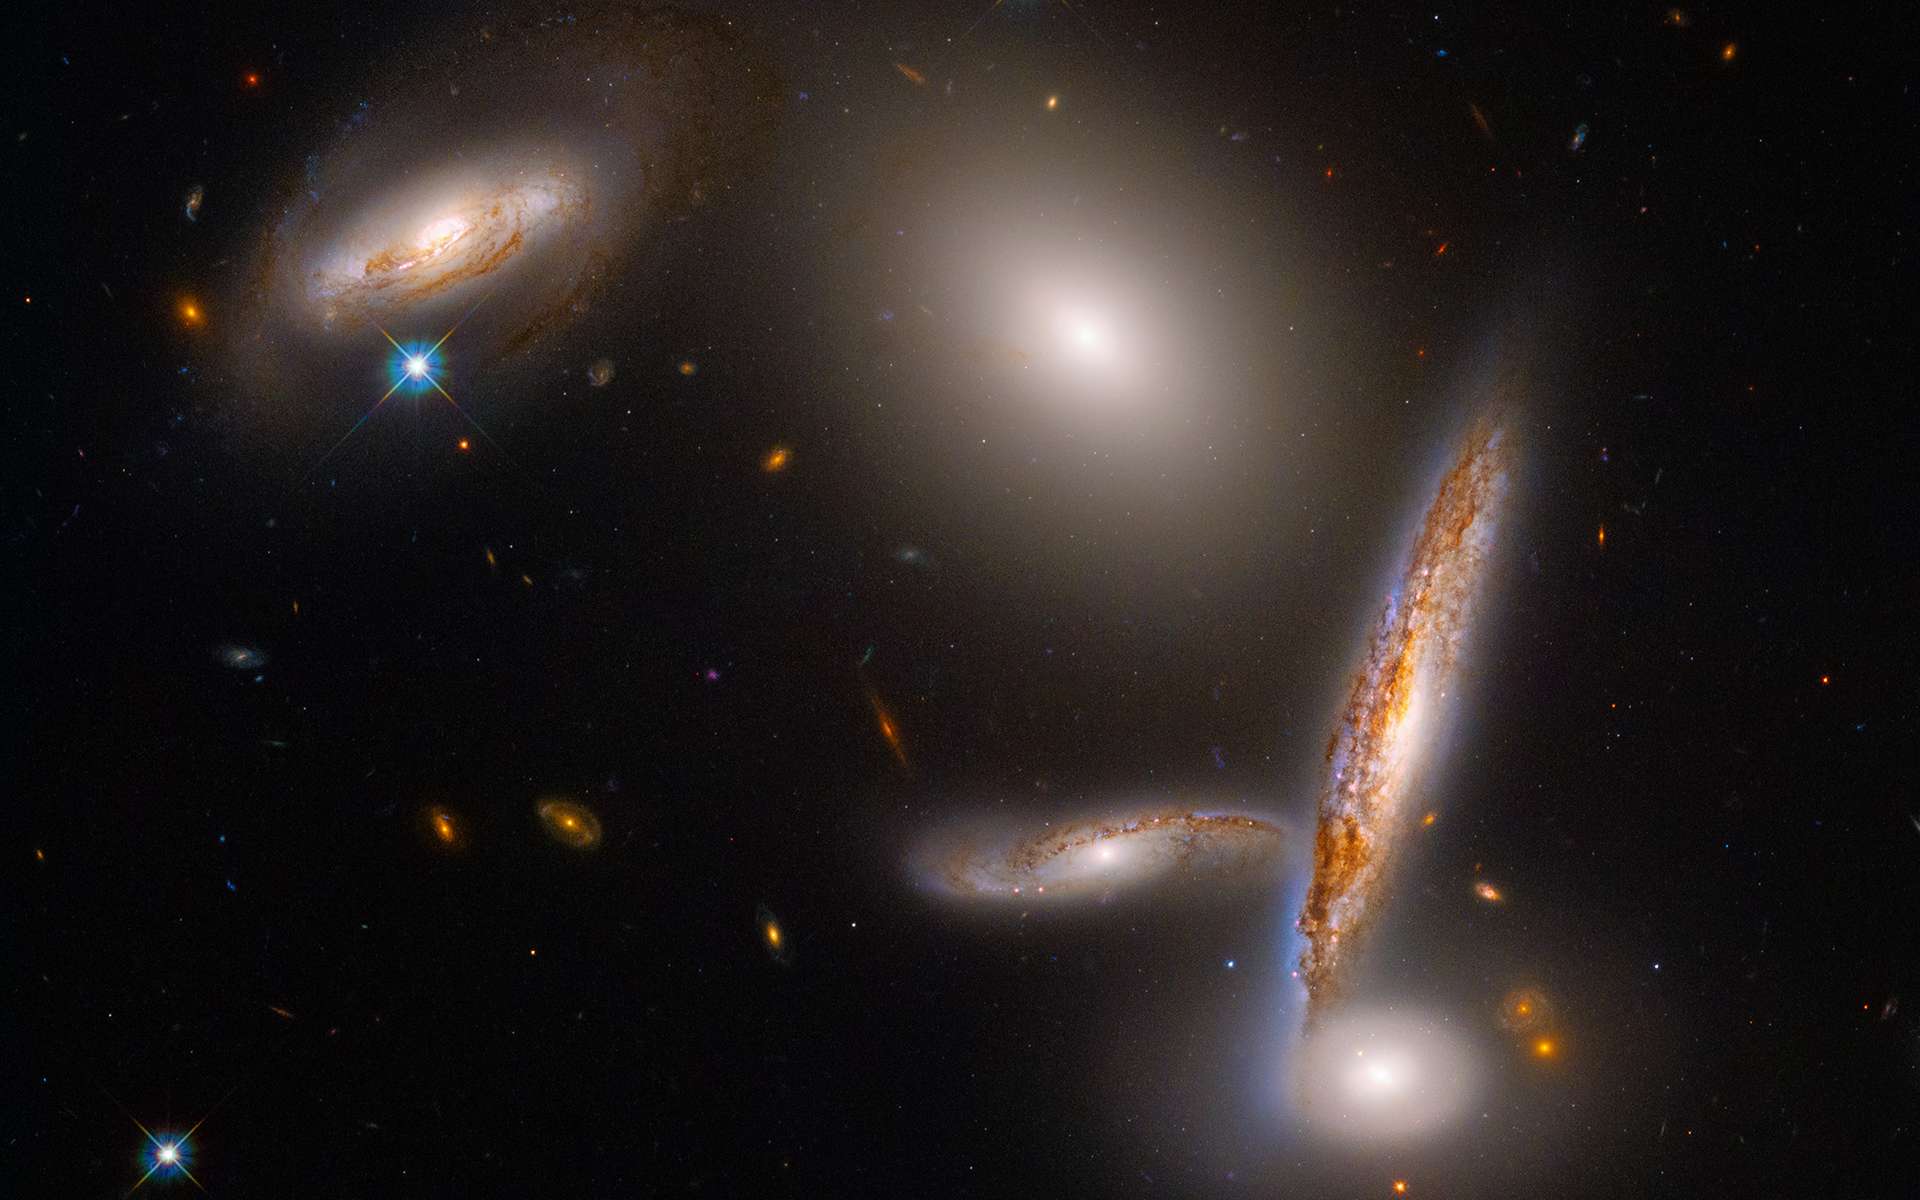 On its 32nd birthday, Hubble spied on 5 amazing galaxies that will merge!